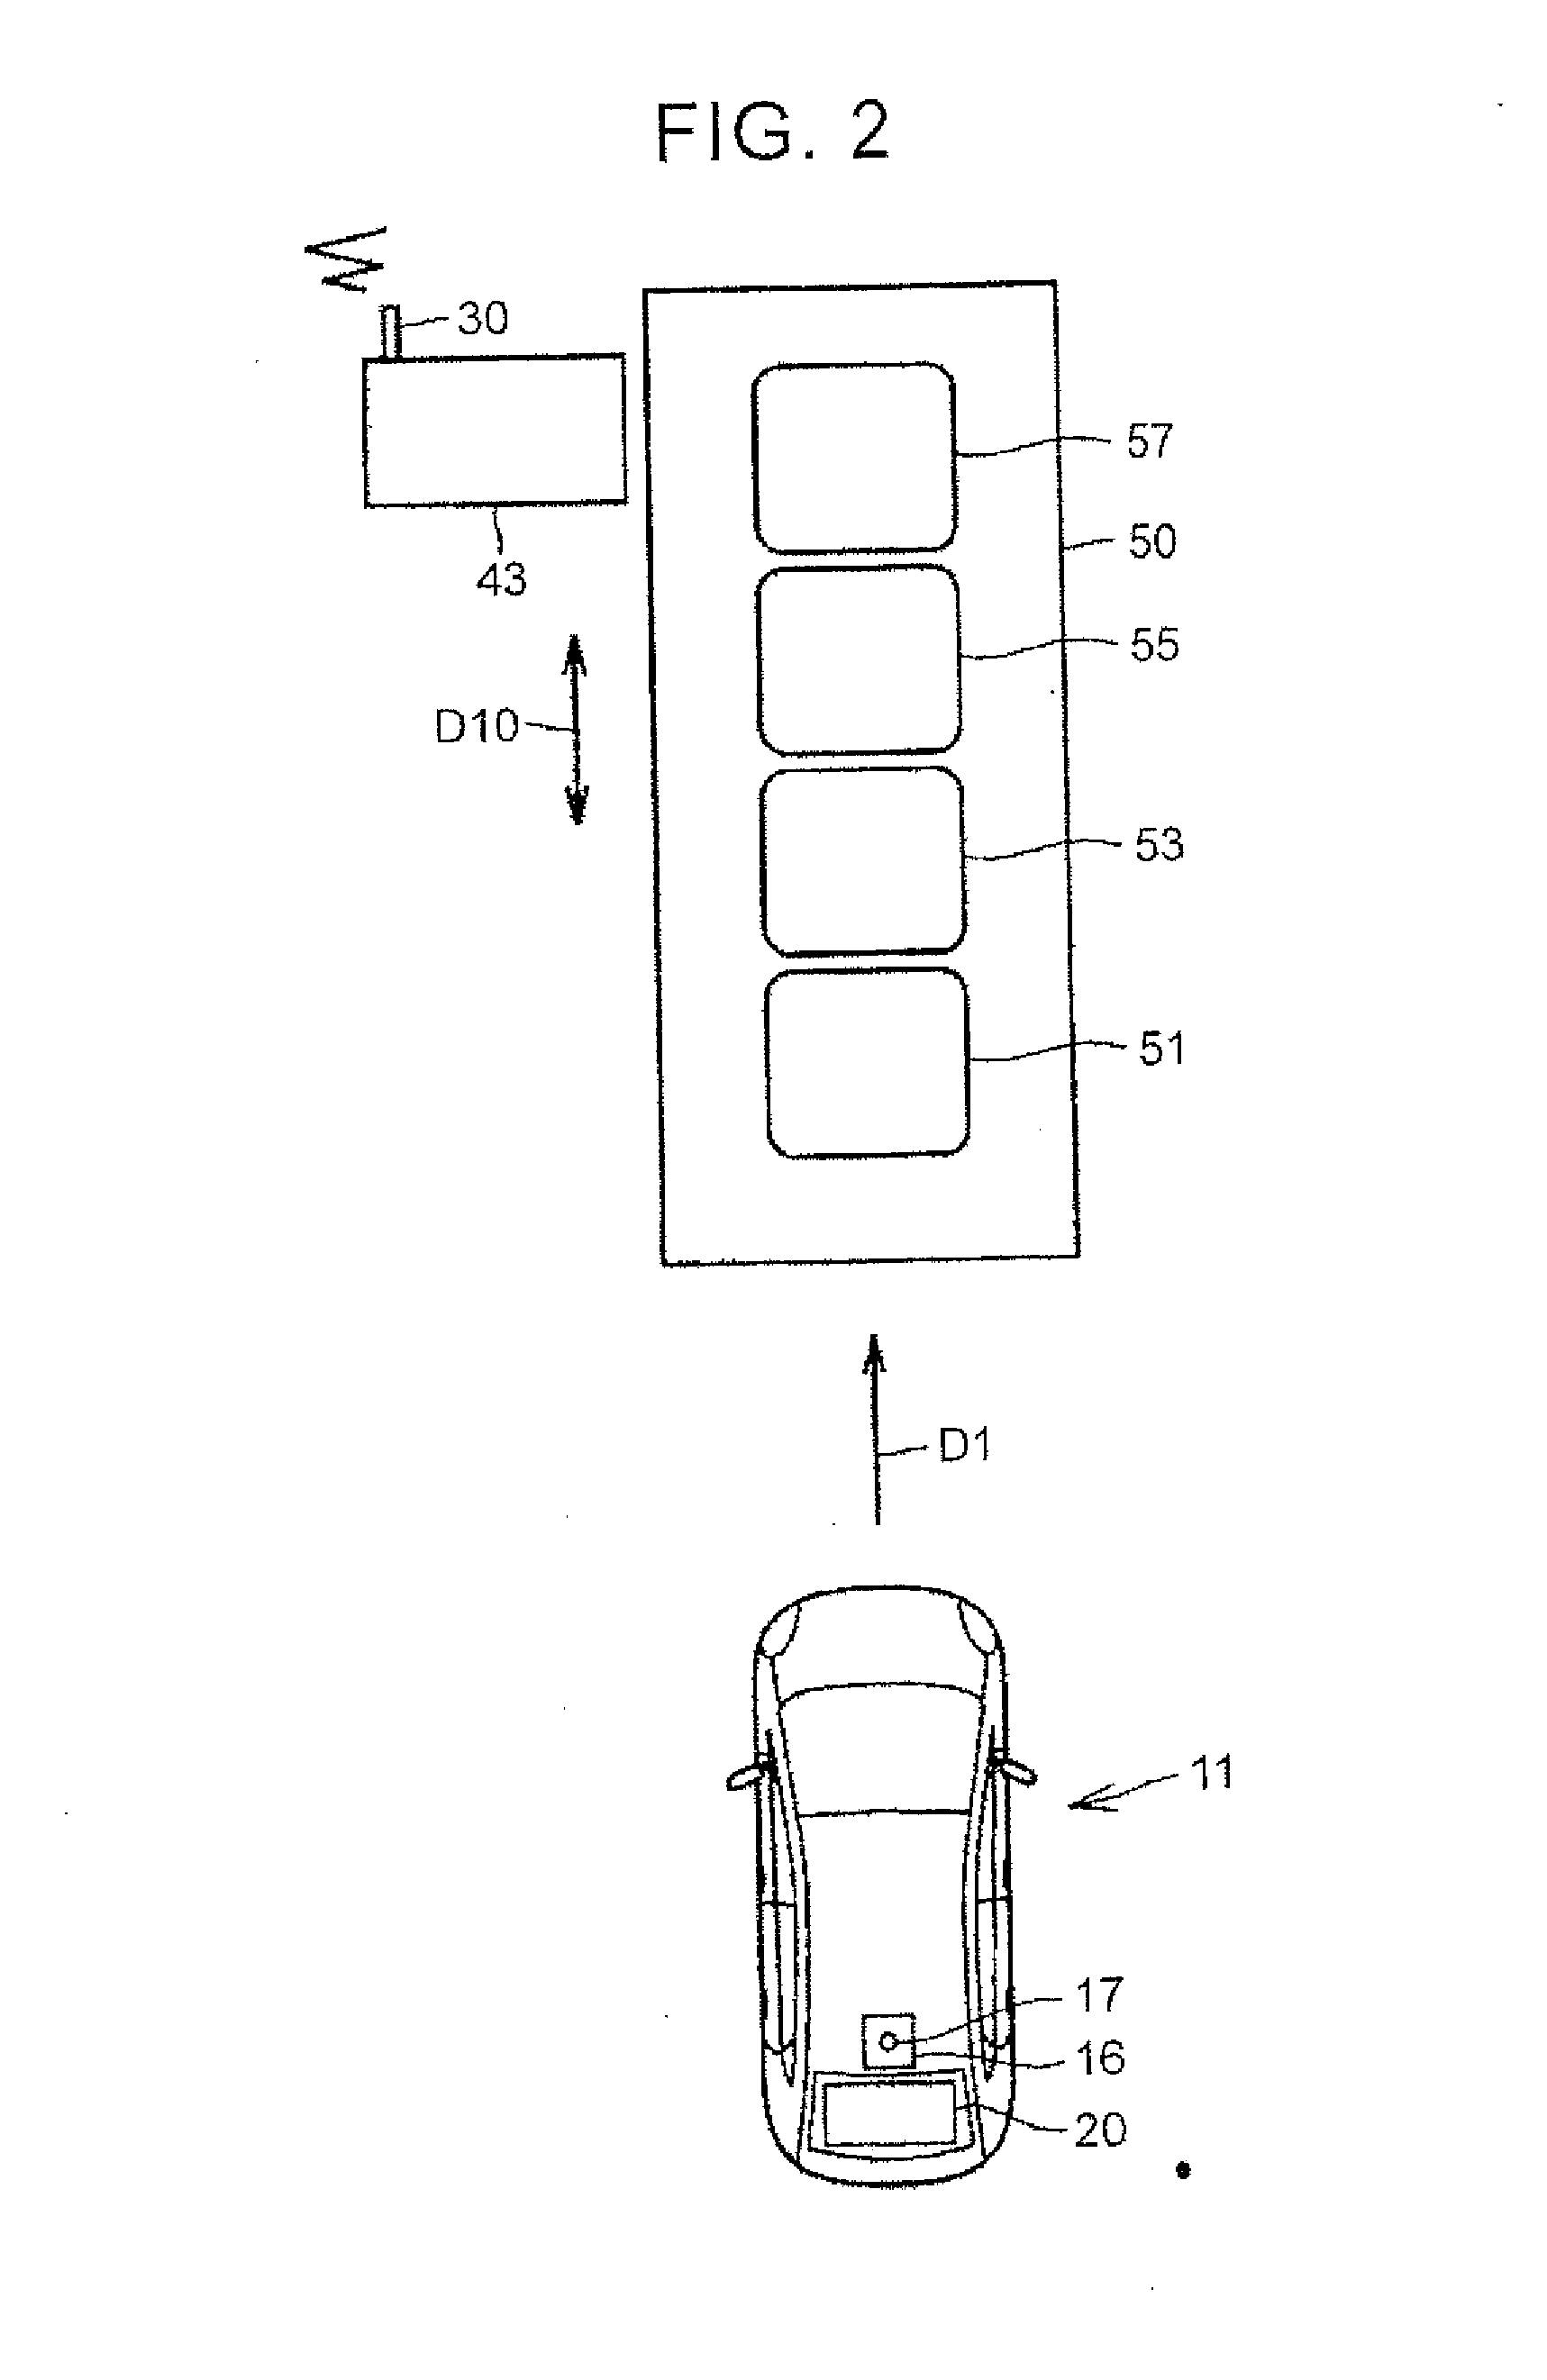 Power transmitting device and power transfer system